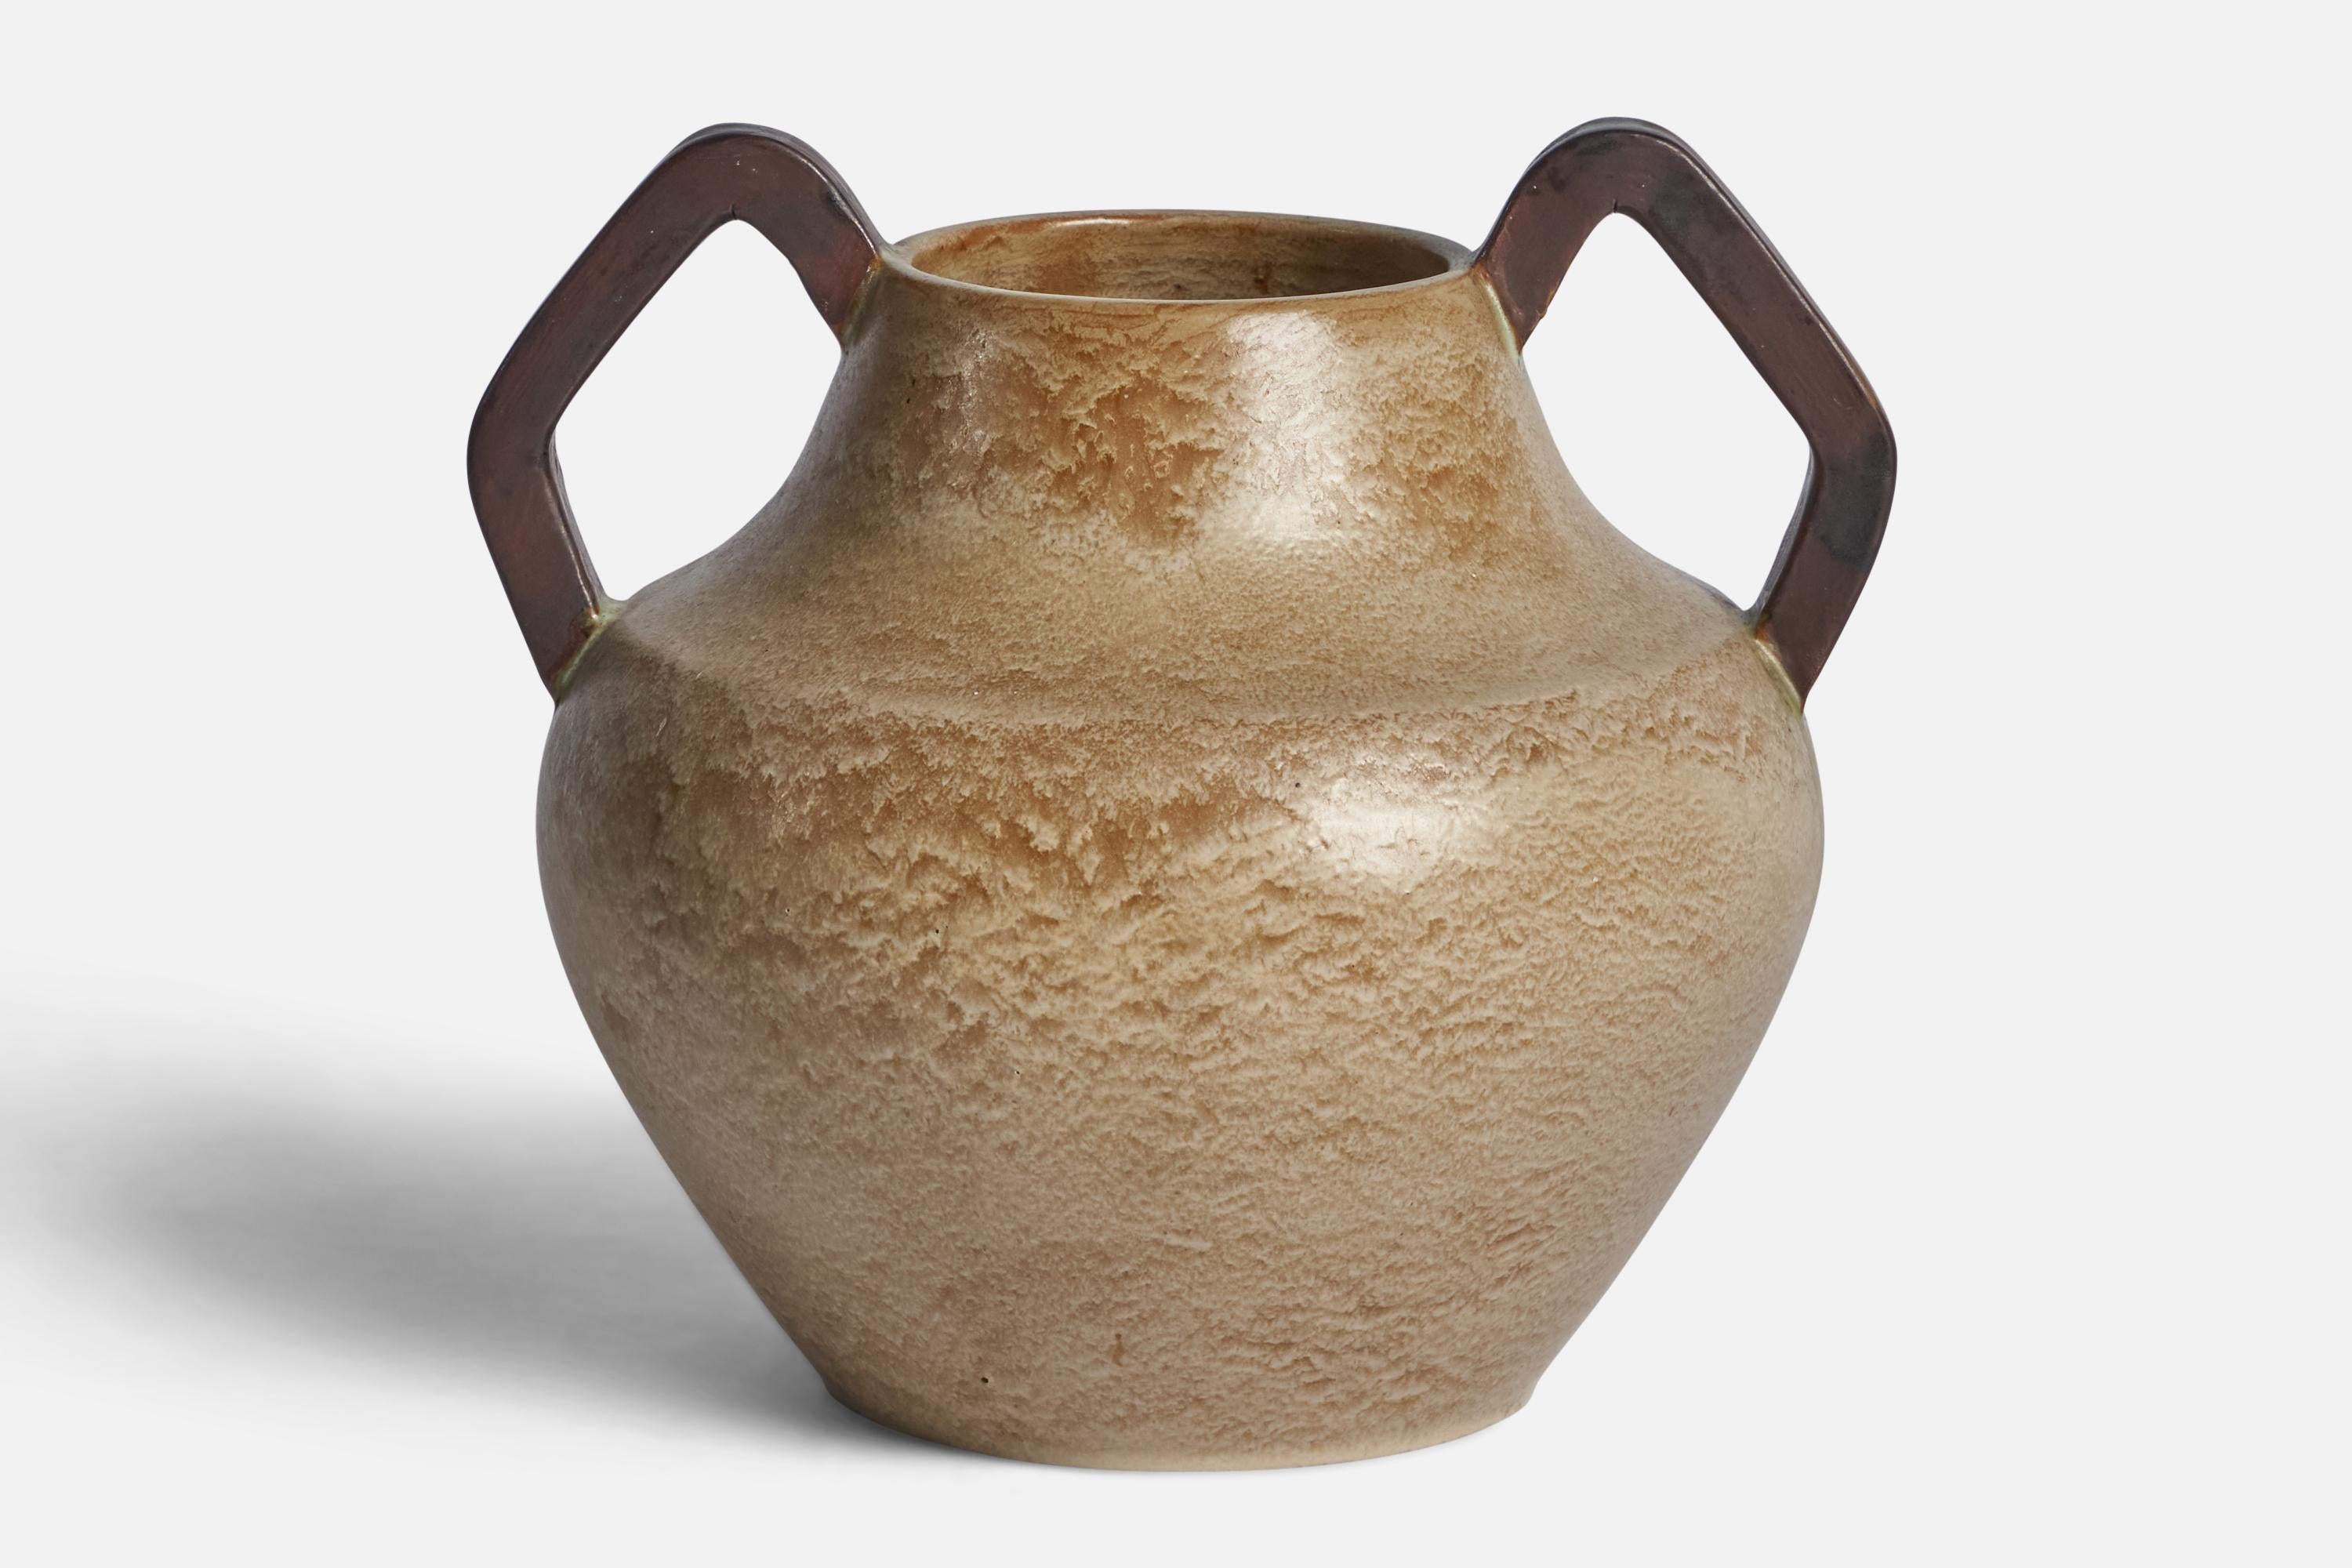 A brown and beige-glazed stoneware vase designed and produced by Andersson & Johansson, Höganäs, Sweden, 1940s.